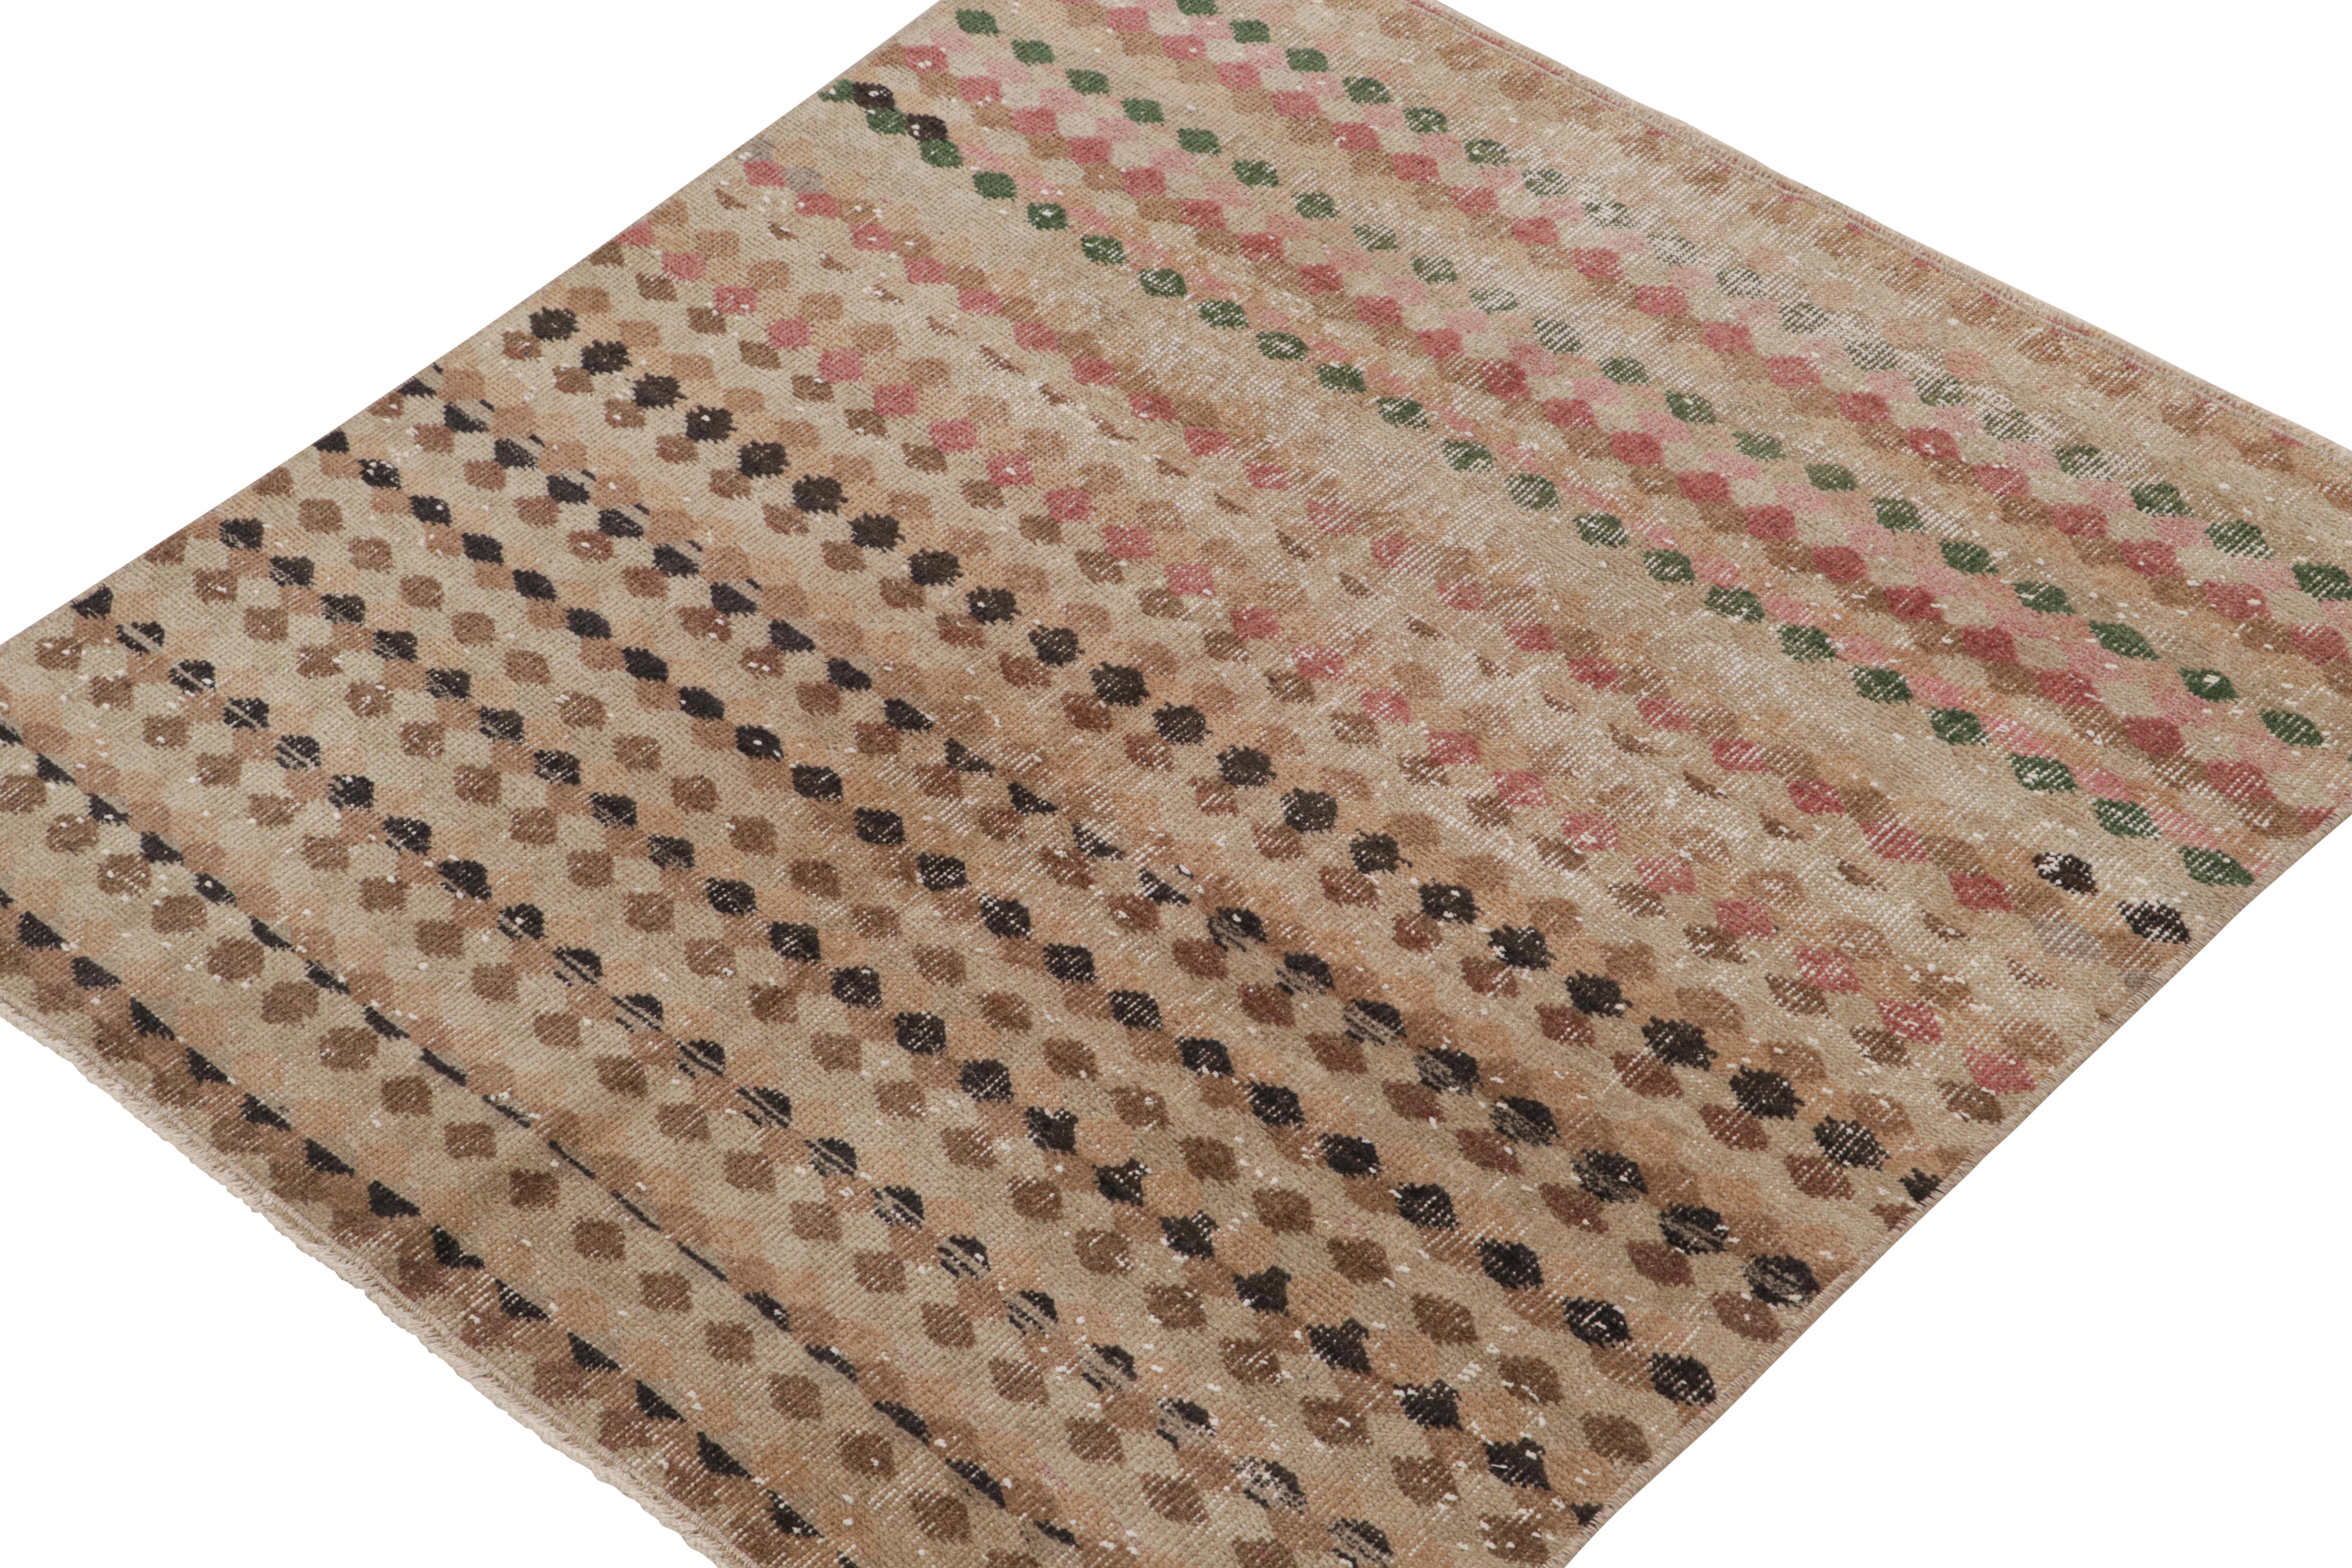 This vintage 4x4 square rug is a new addition to Rug & Kilim’s midcentury Pasha Collection. This line is a commemoration, with rare curations we believe to hail from multidisciplinary Turkish designer Zeki Müren. 
Further on the Design:

This